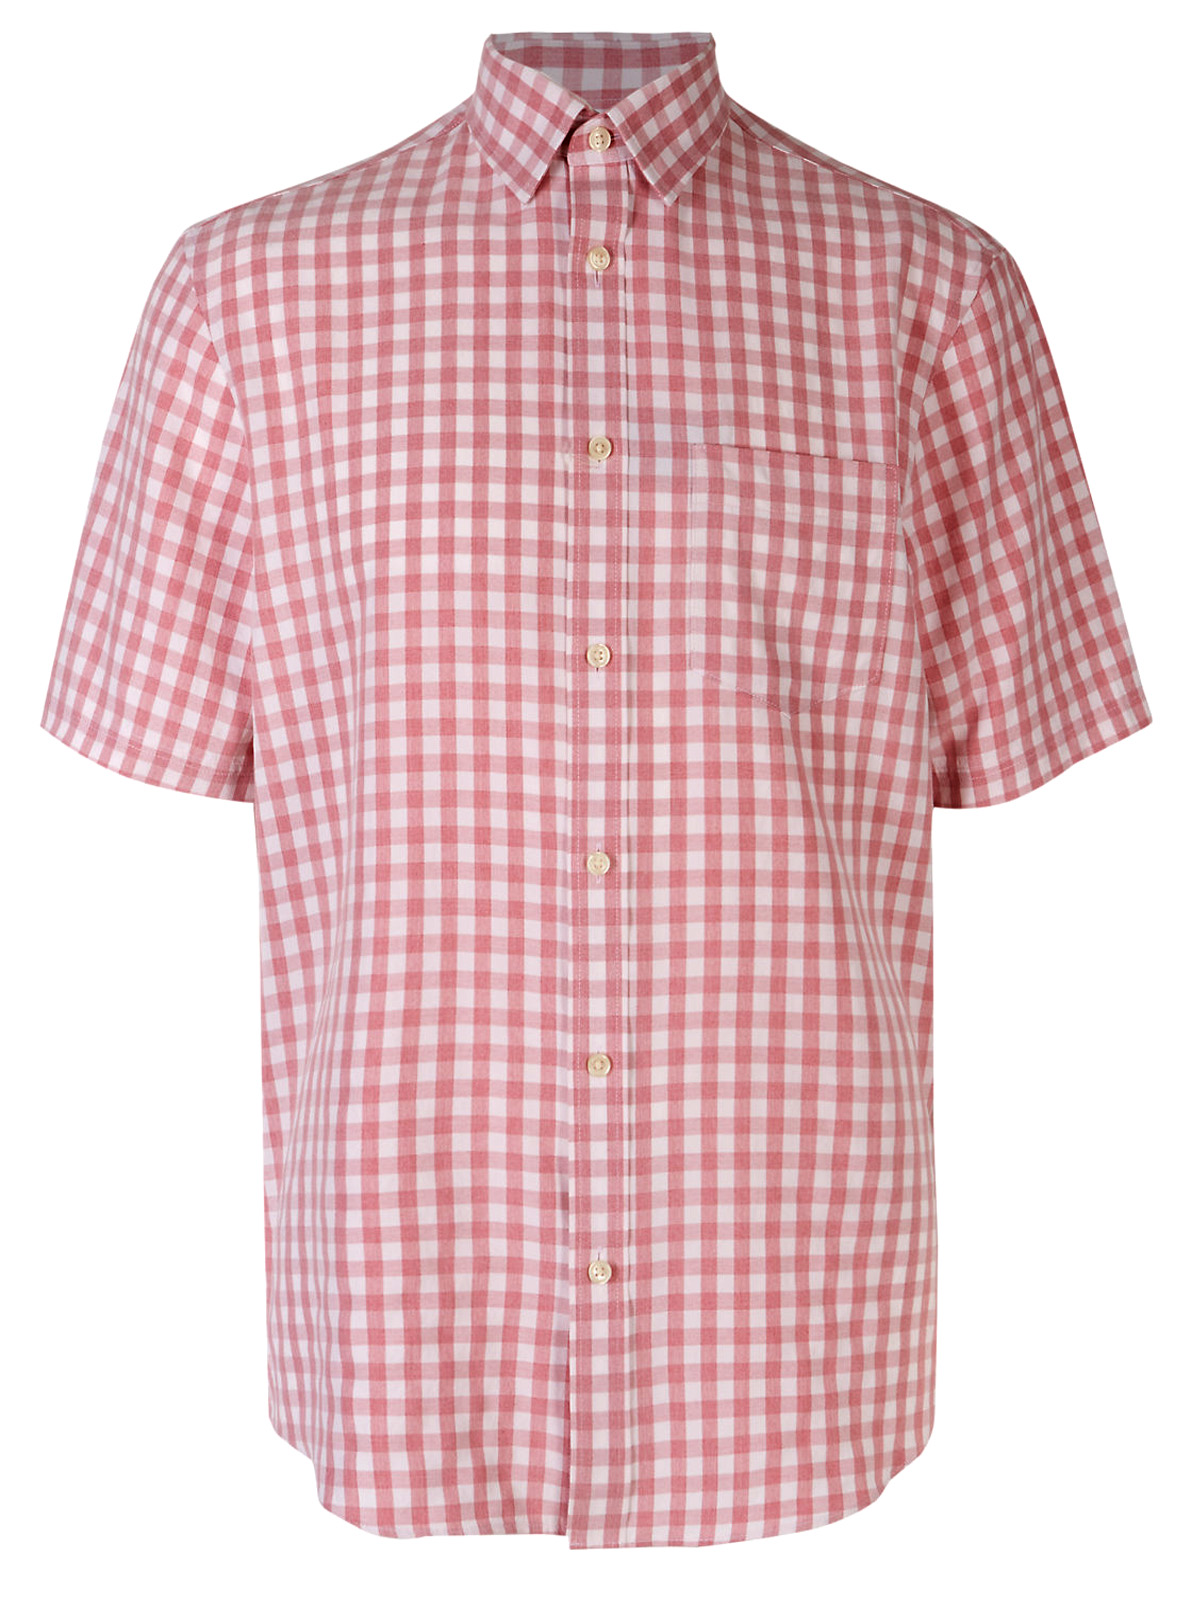 Marks And Spencer Mand5 Mens Soft Coral Pure Cotton Checked Short Sleeve Shirt Size Large To